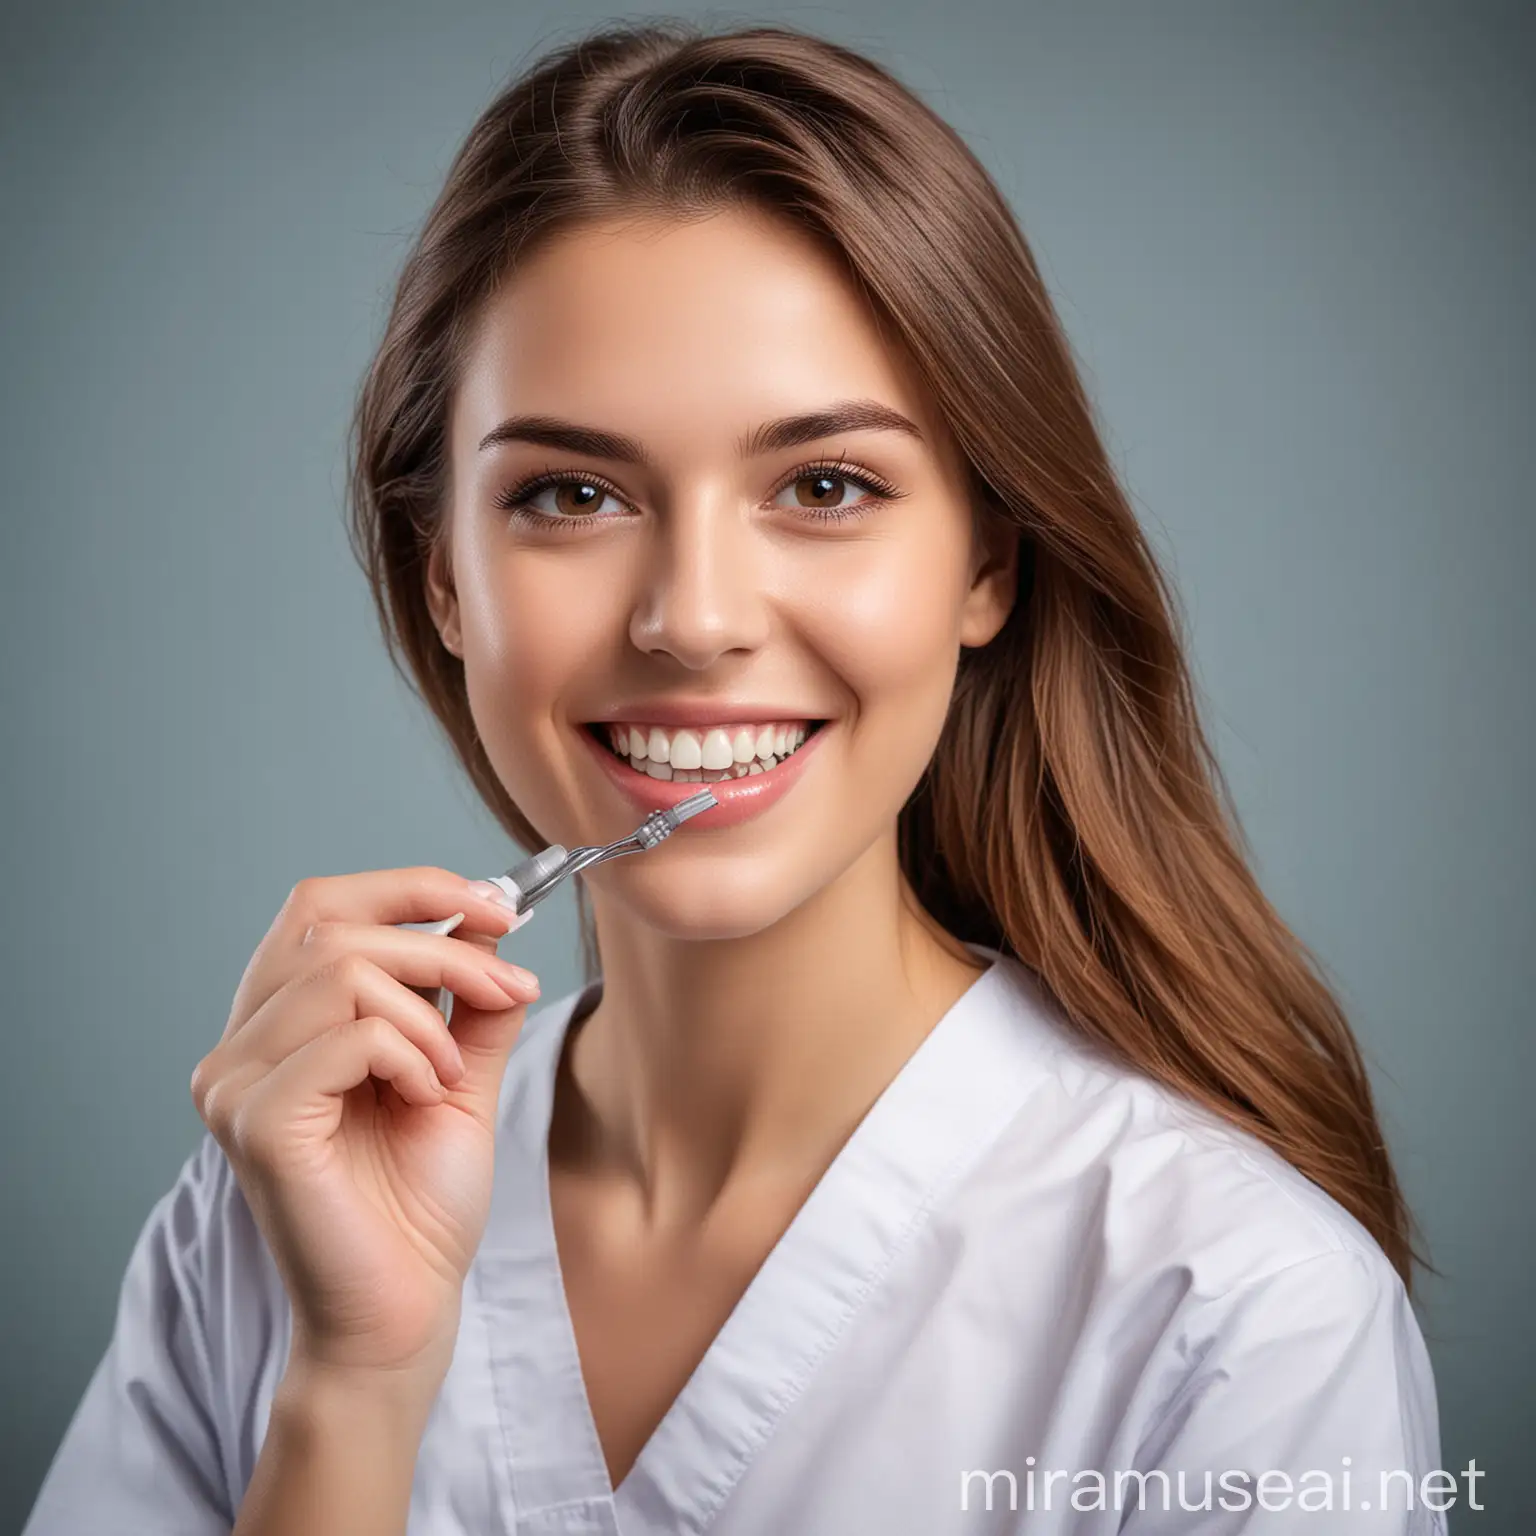 A young lady model for photos about dental clinics (dentists)